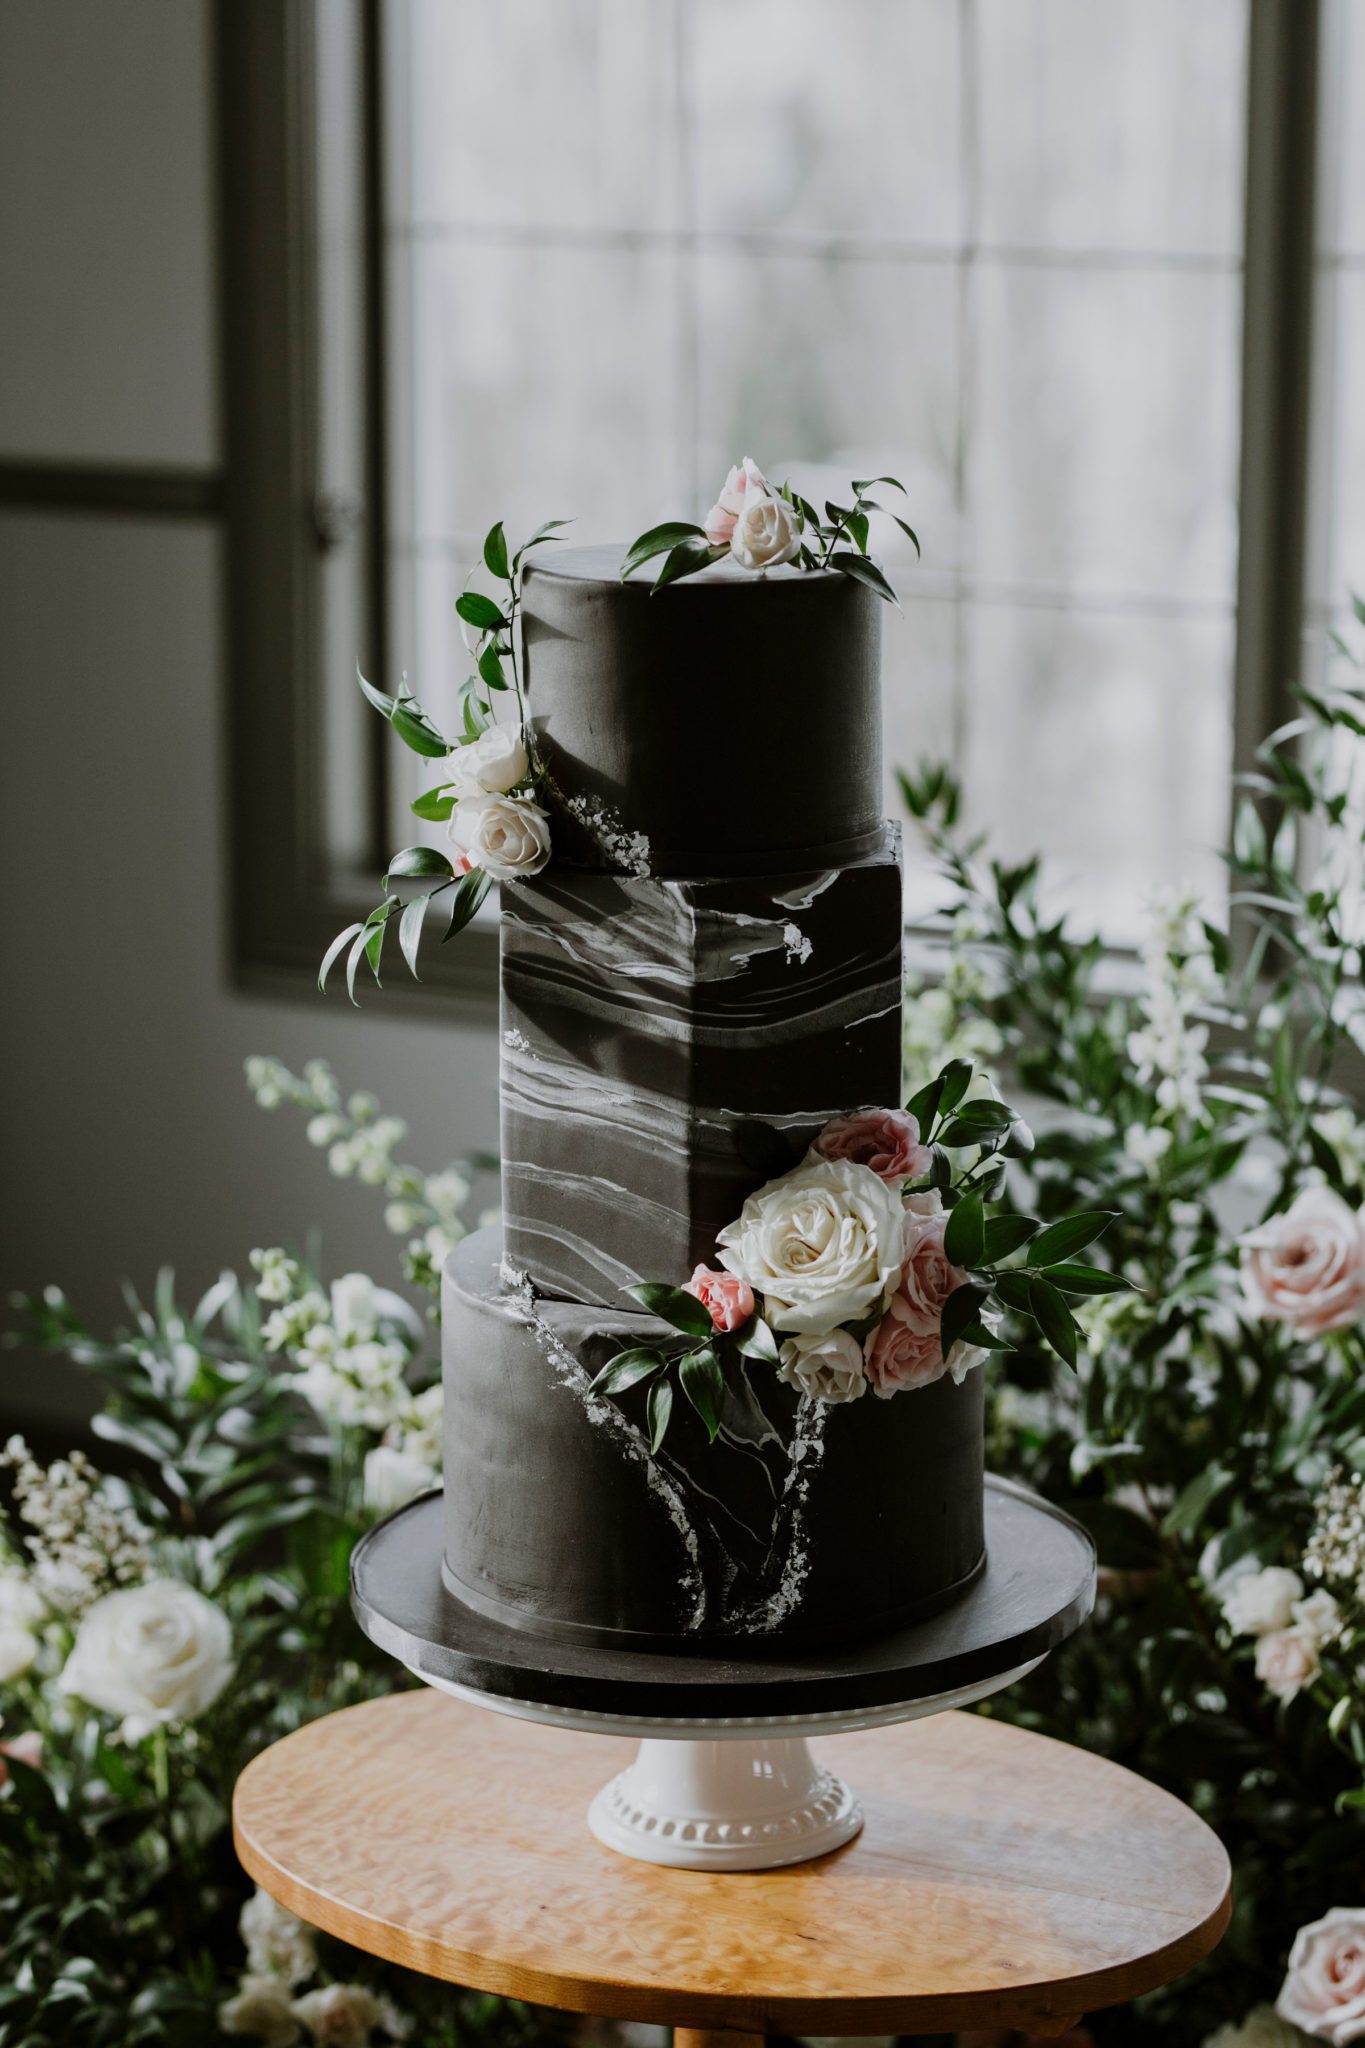 show-stopping wedding cake with black and white marbled cake with geometric influence